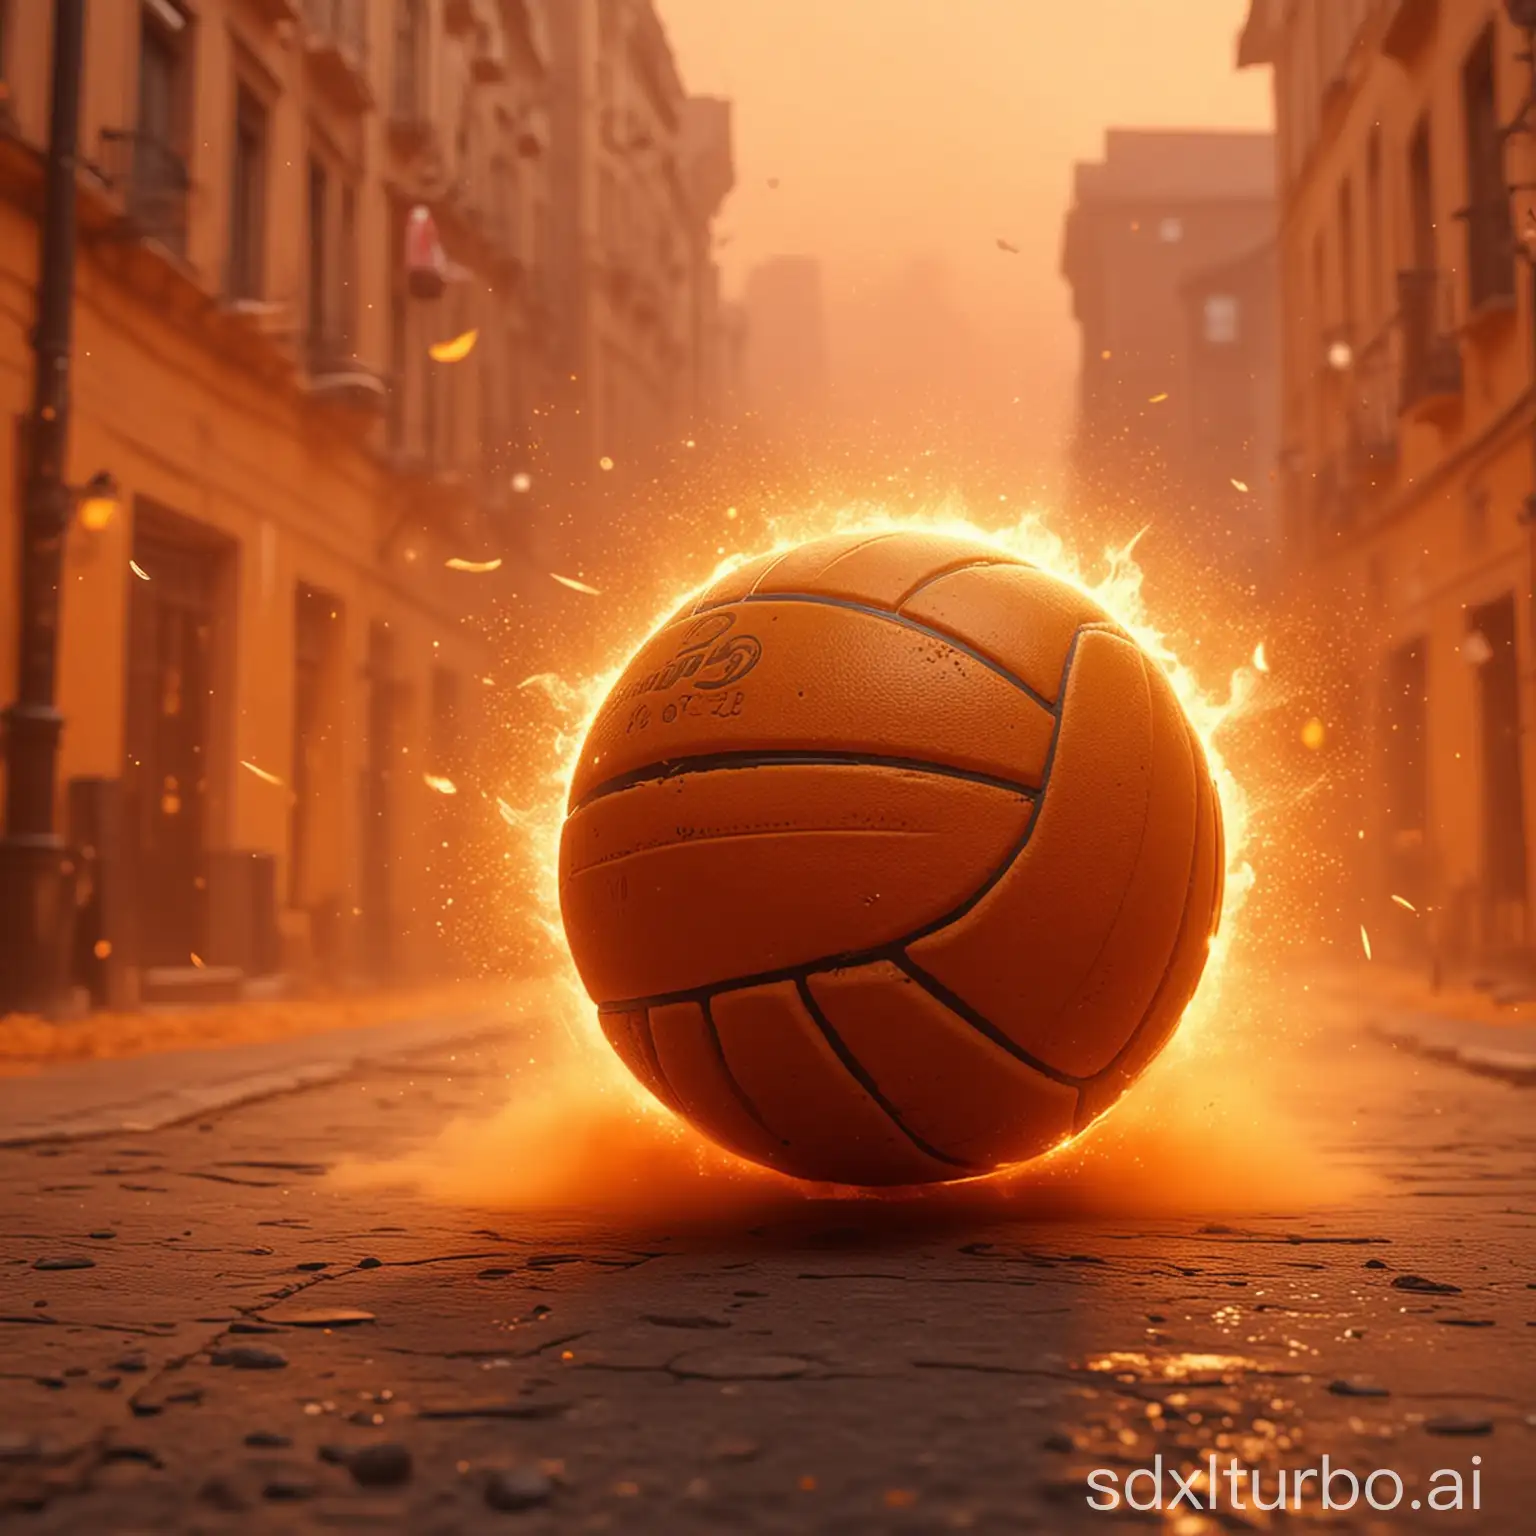 Epic-Orange-Volleyball-Match-with-Mystical-Atmosphere-on-City-Streets